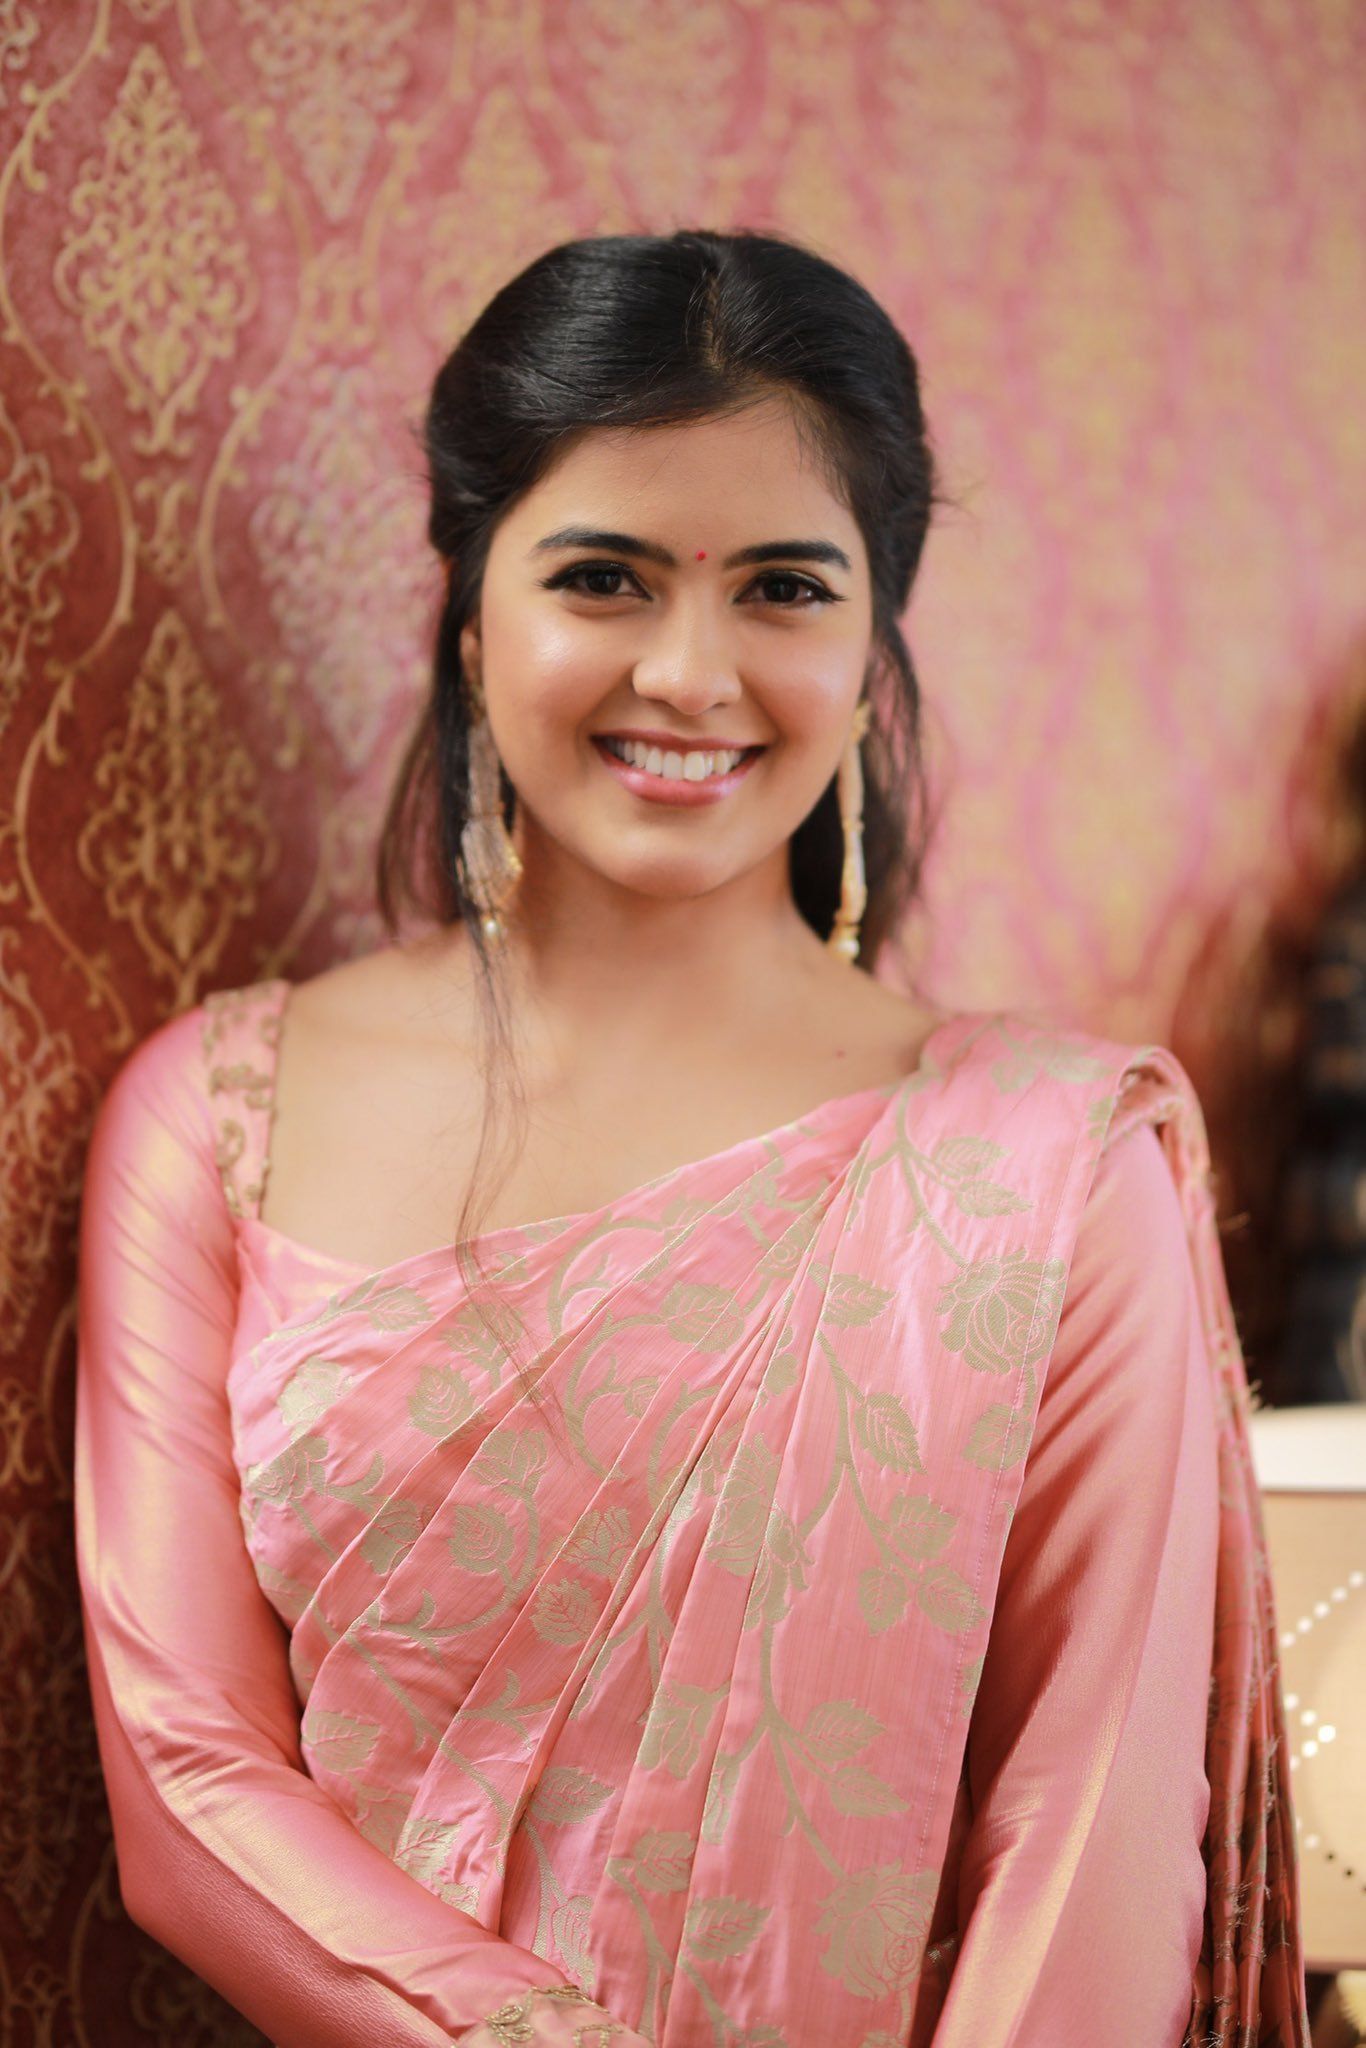 Amritha Aiyer Photo [HD]: Latest Image, Picture, Stills of Amritha Aiyer